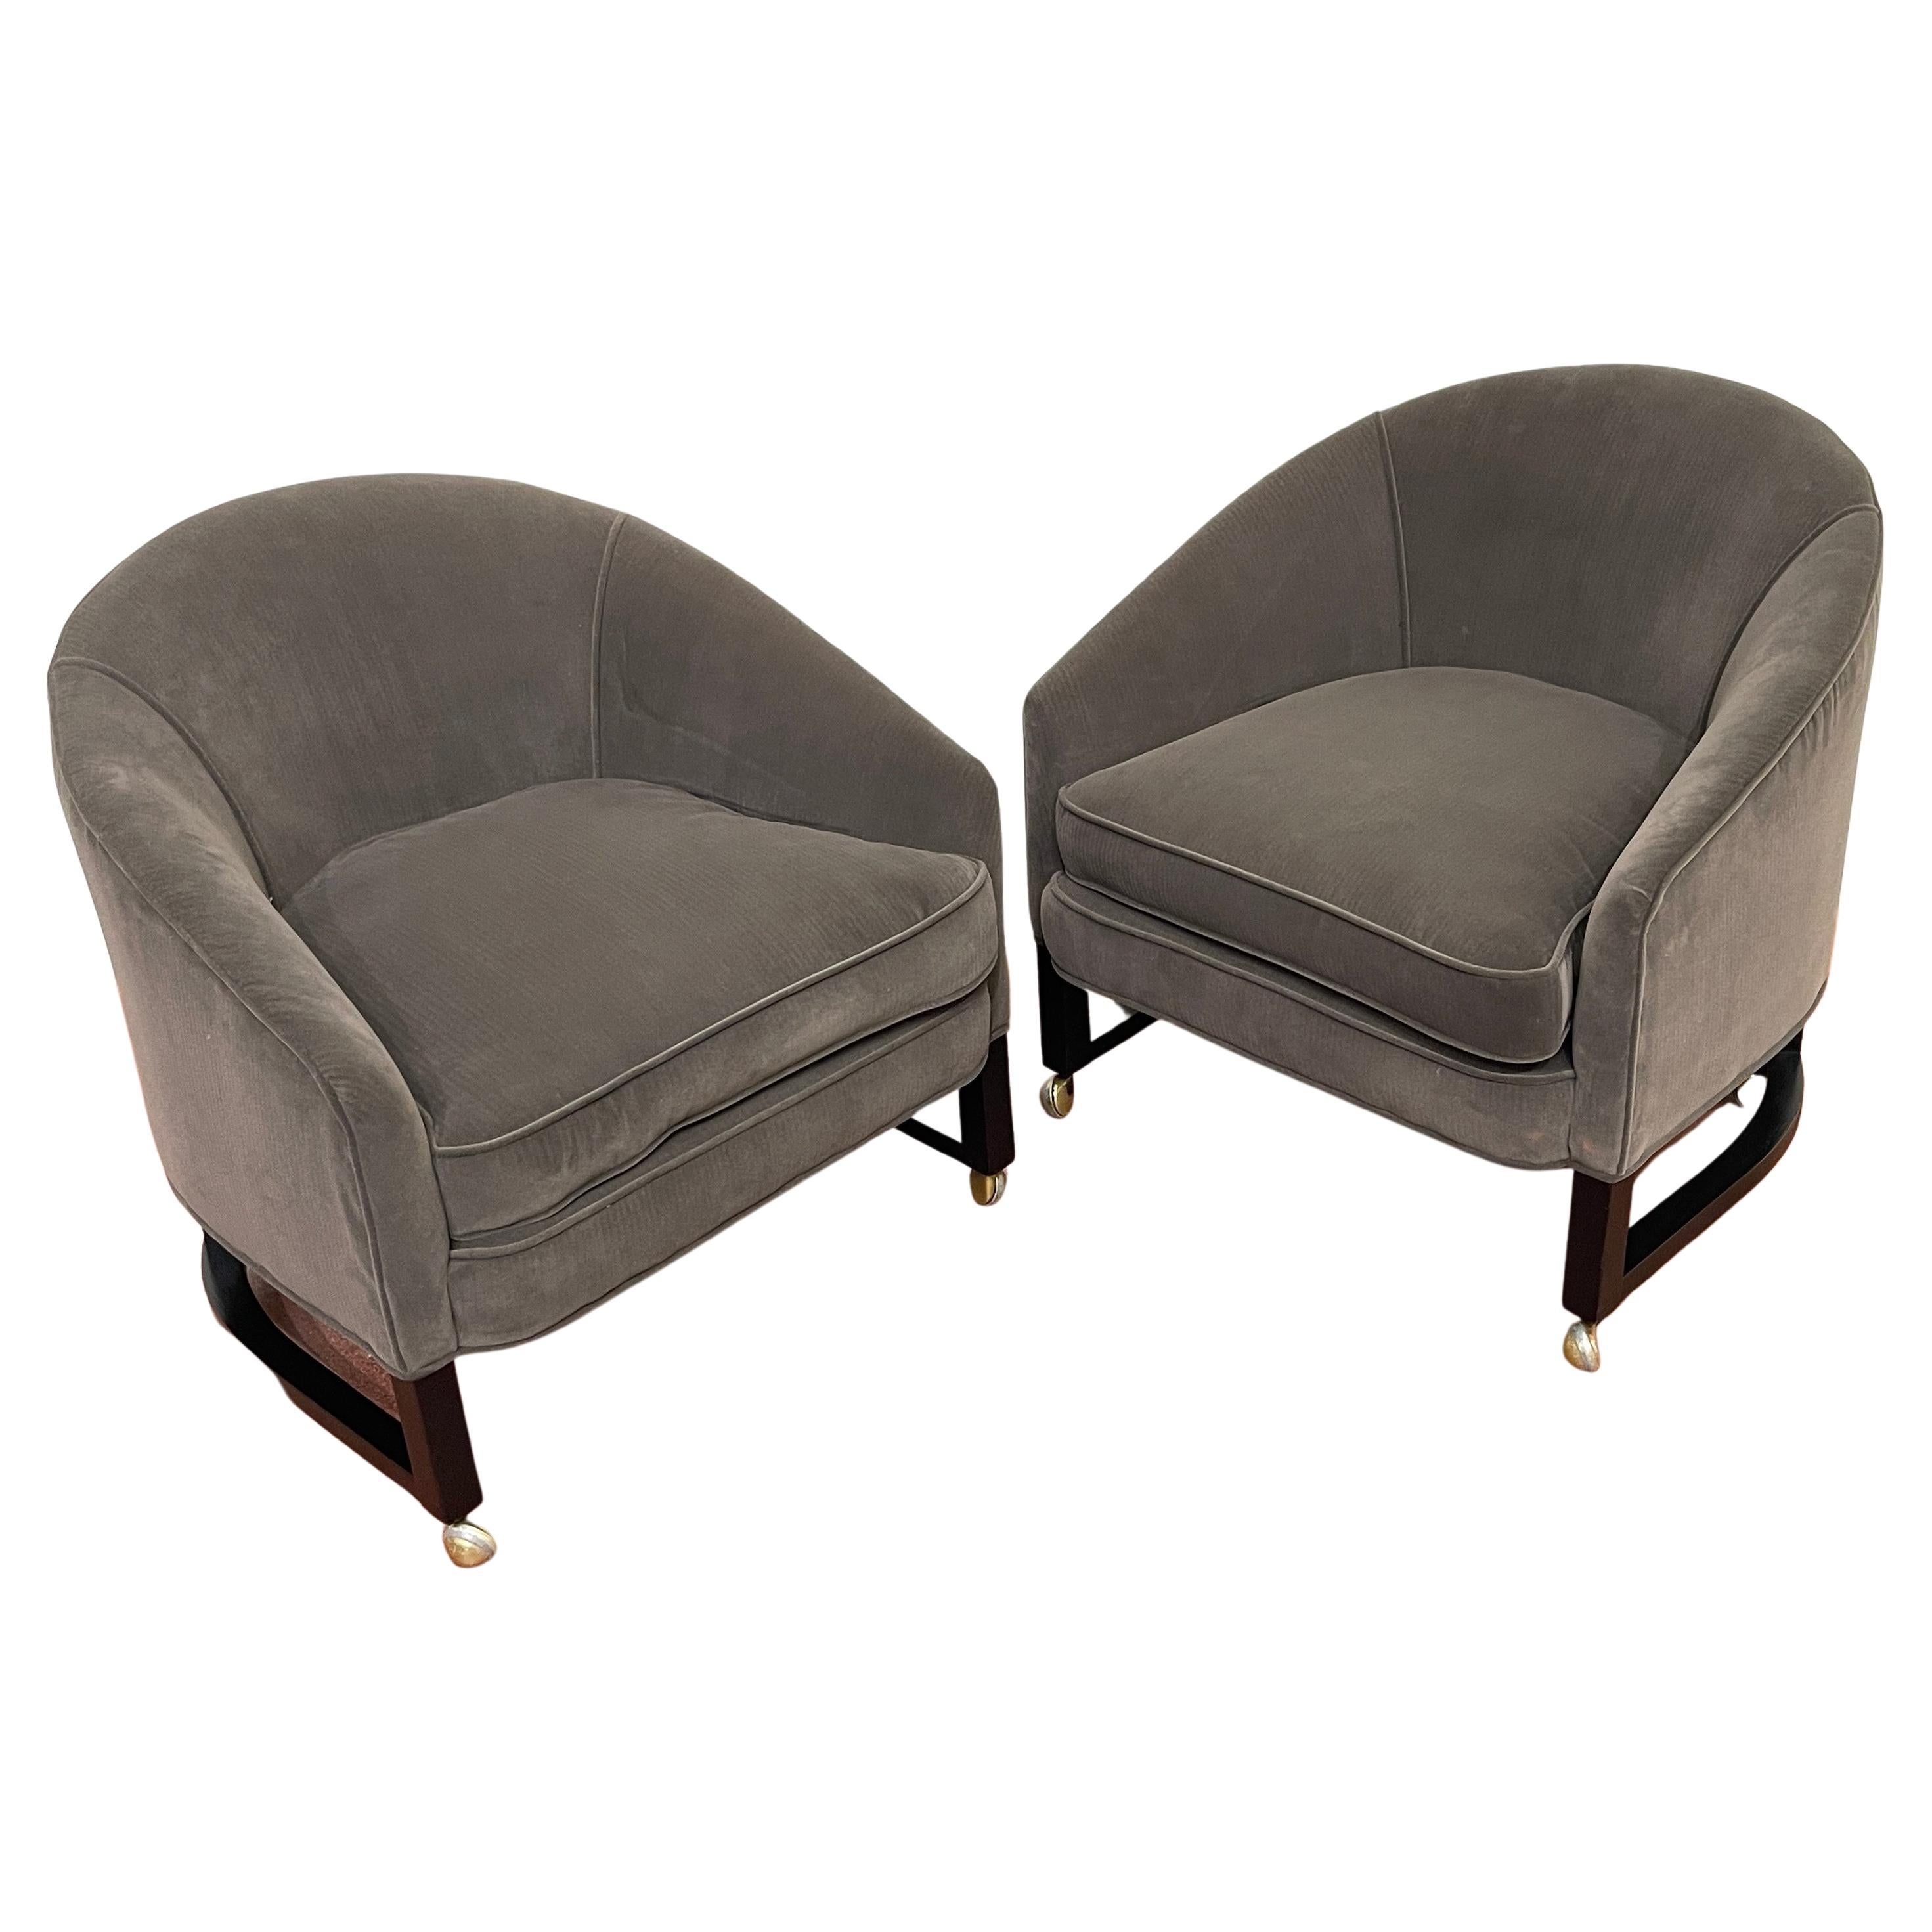 Pair of 1970s Low Profile Barrel Back Club Chairs, Style of Harvey Probber